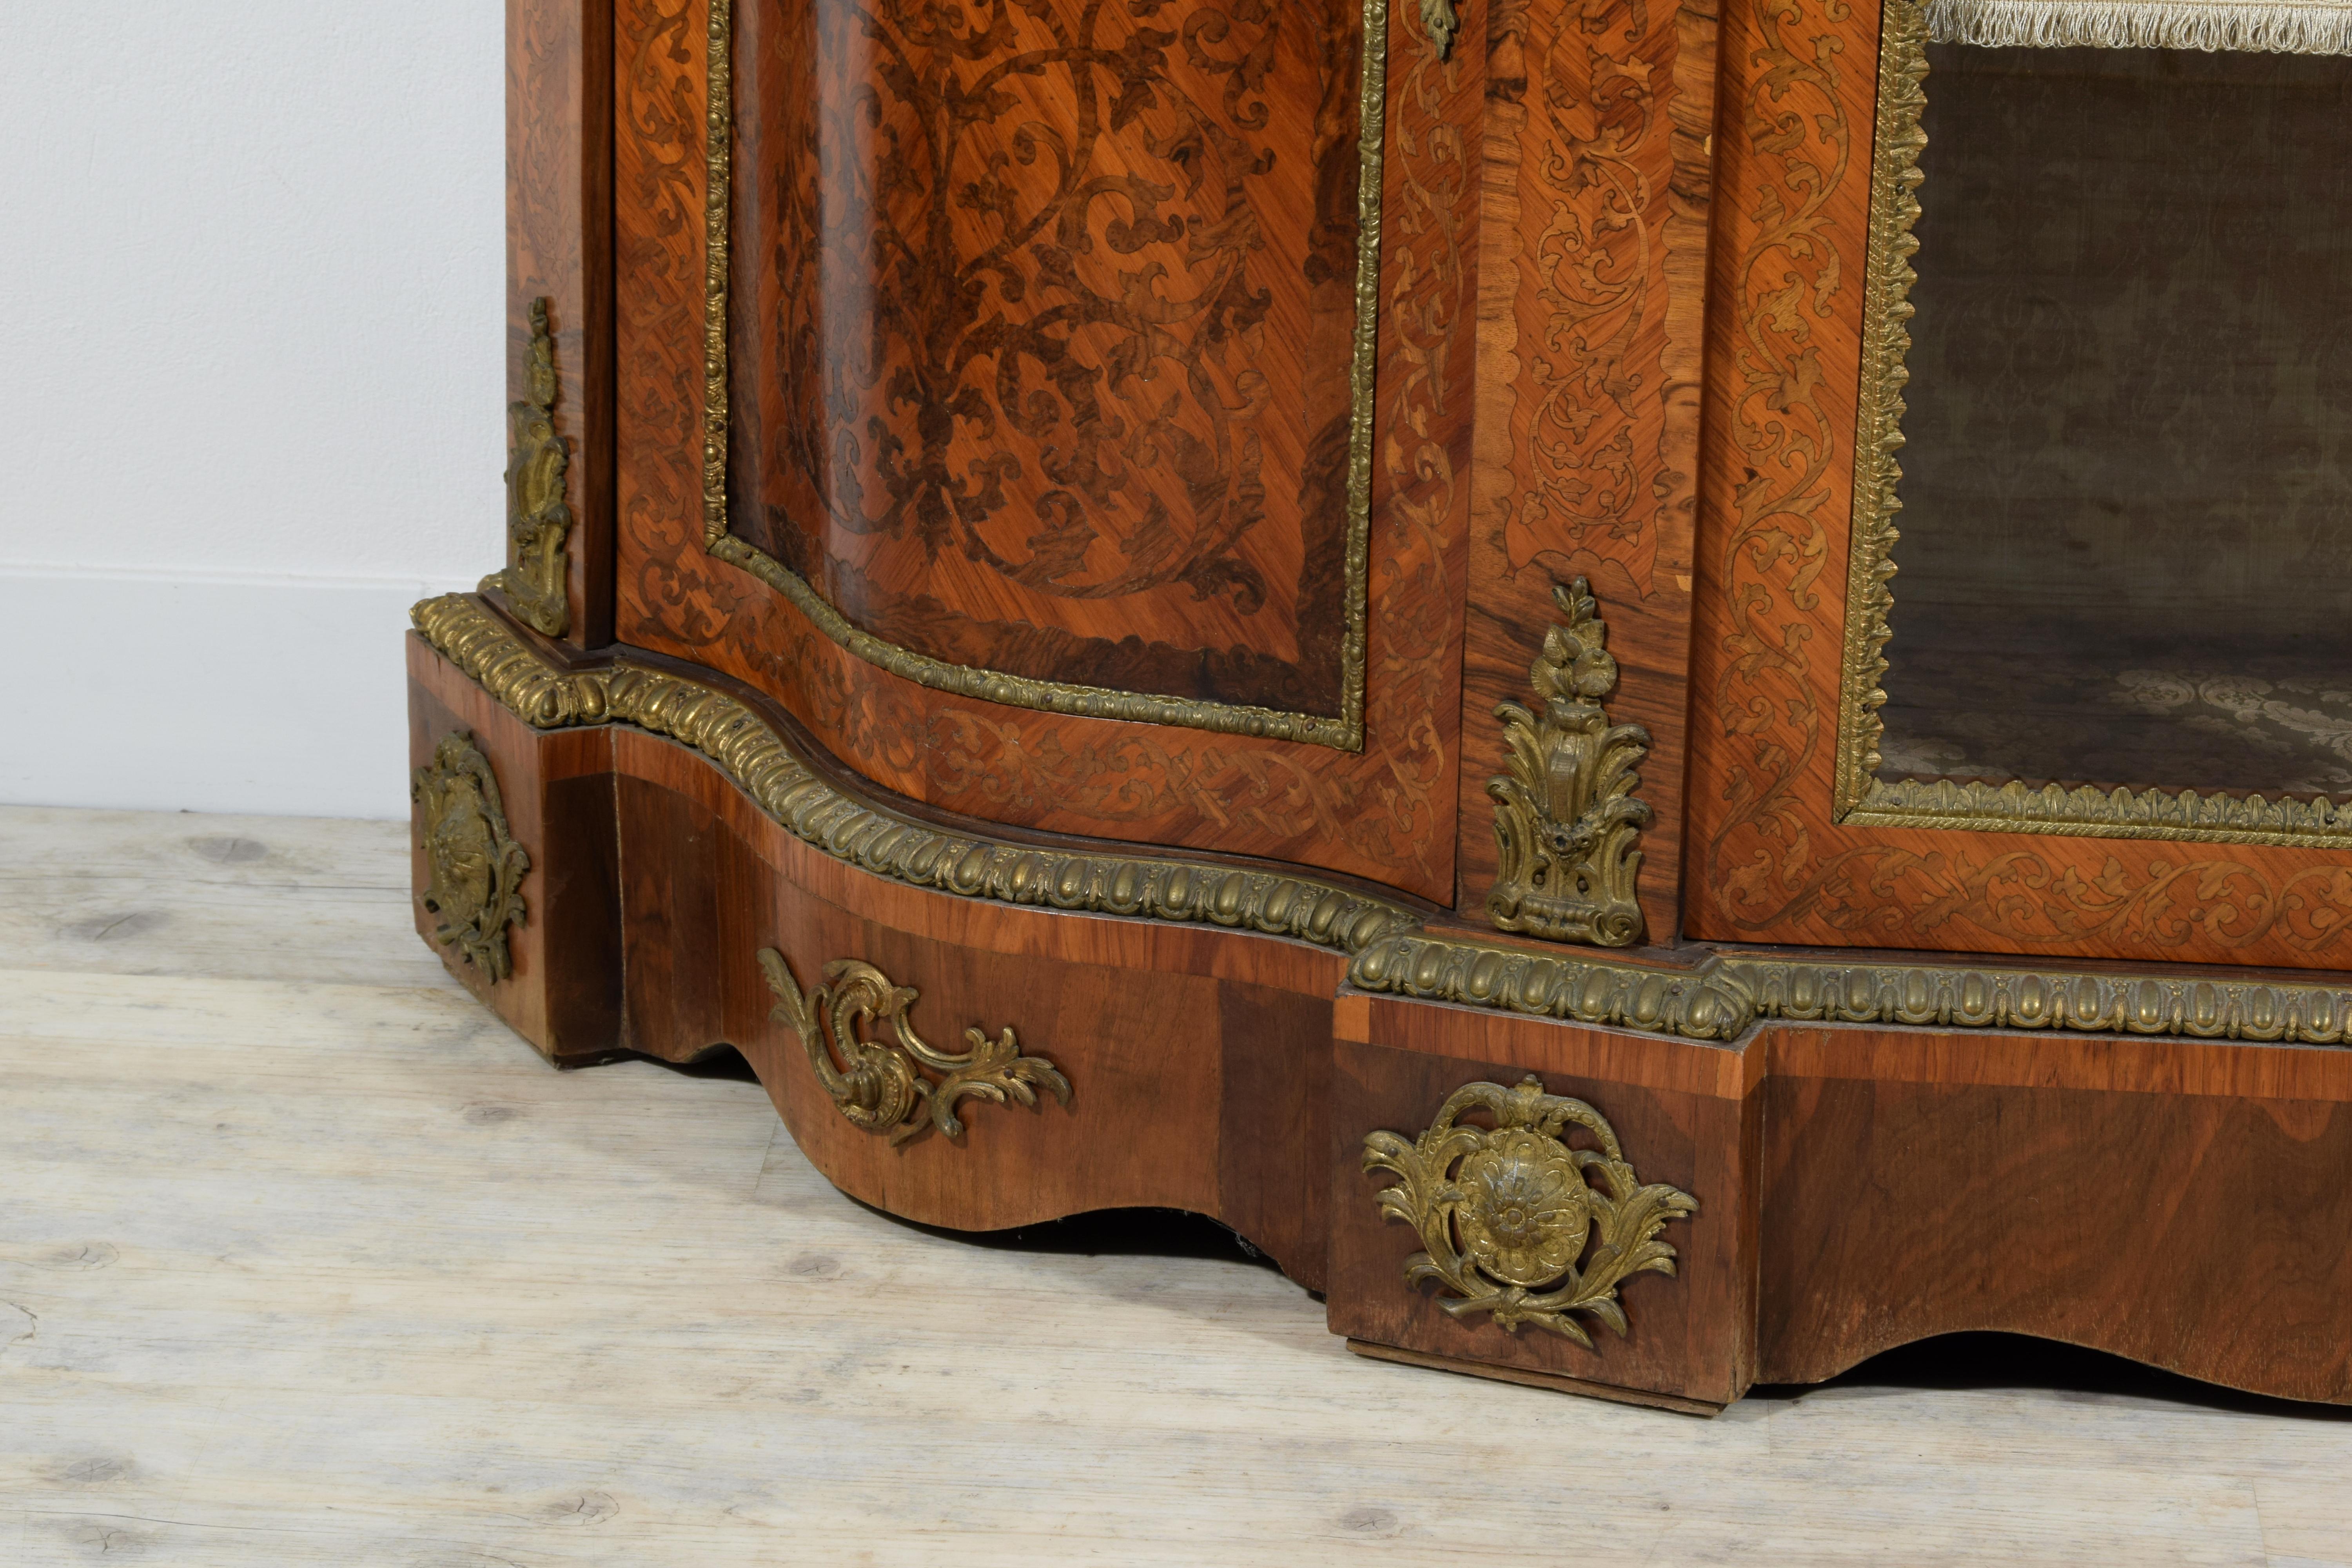 19th Century, English Inlaid Wood Sideboard with Gilt Bronzes 8